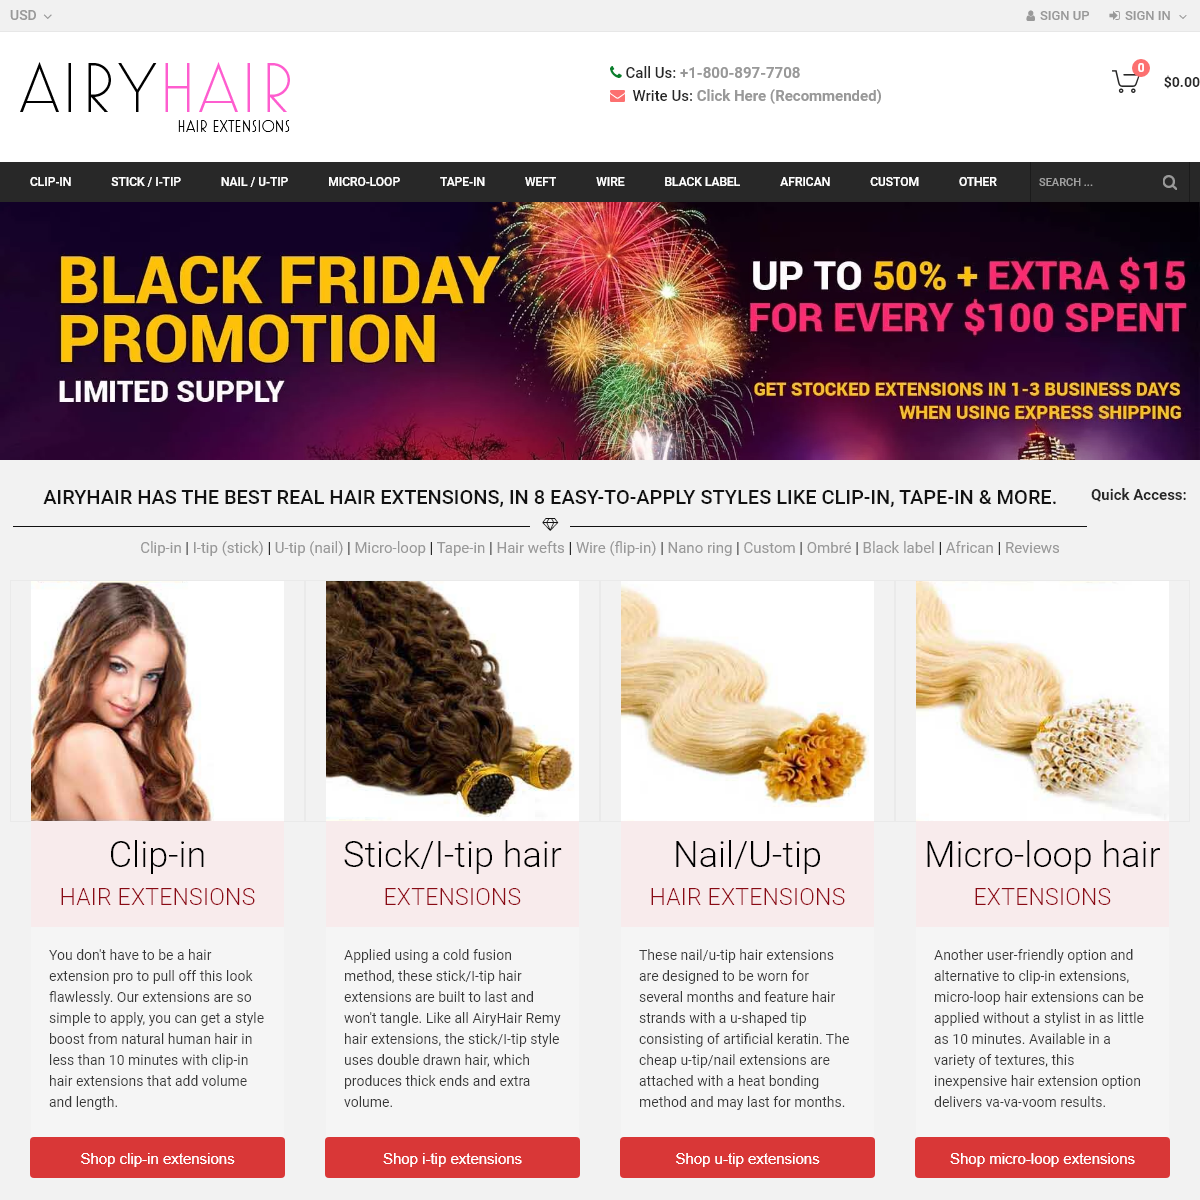 A complete backup of airyhair.com